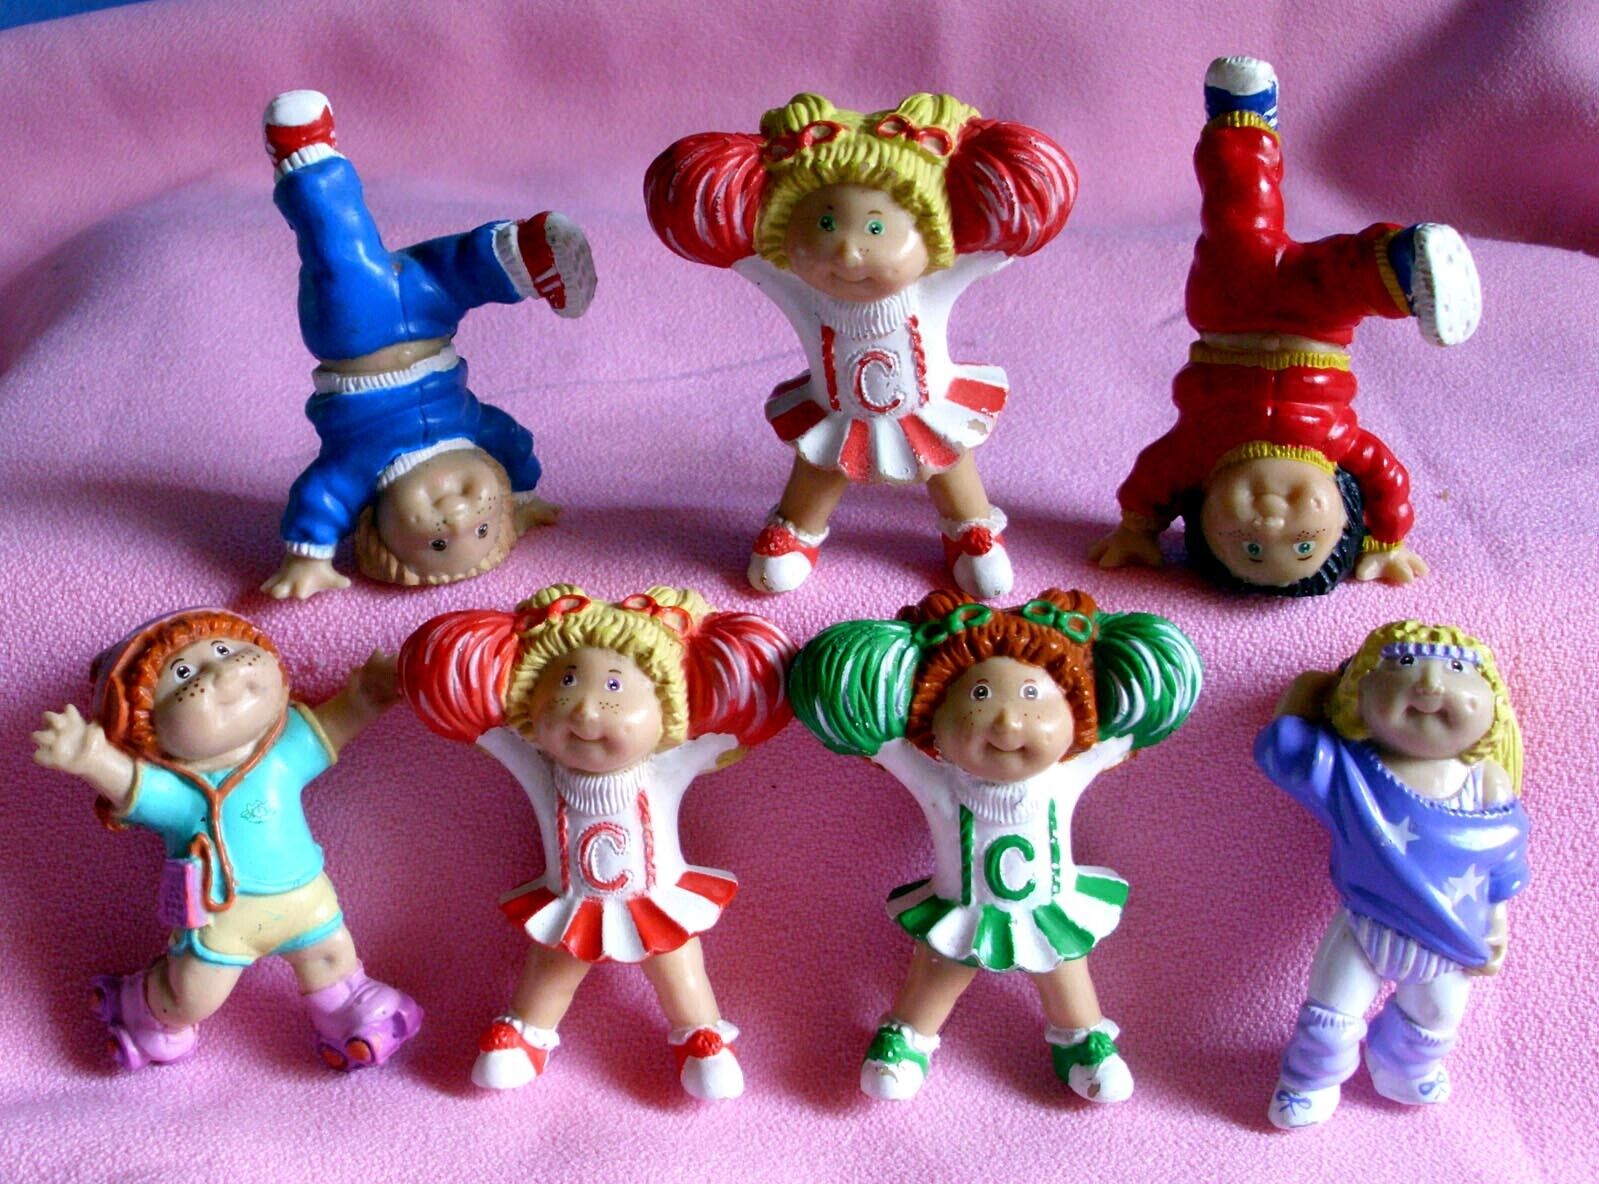 CABBAGE PATCH KIDS CPK VINTAGE OAA 1984 - 7 PVC FIGURES - LET'S PLAY! Без бренда